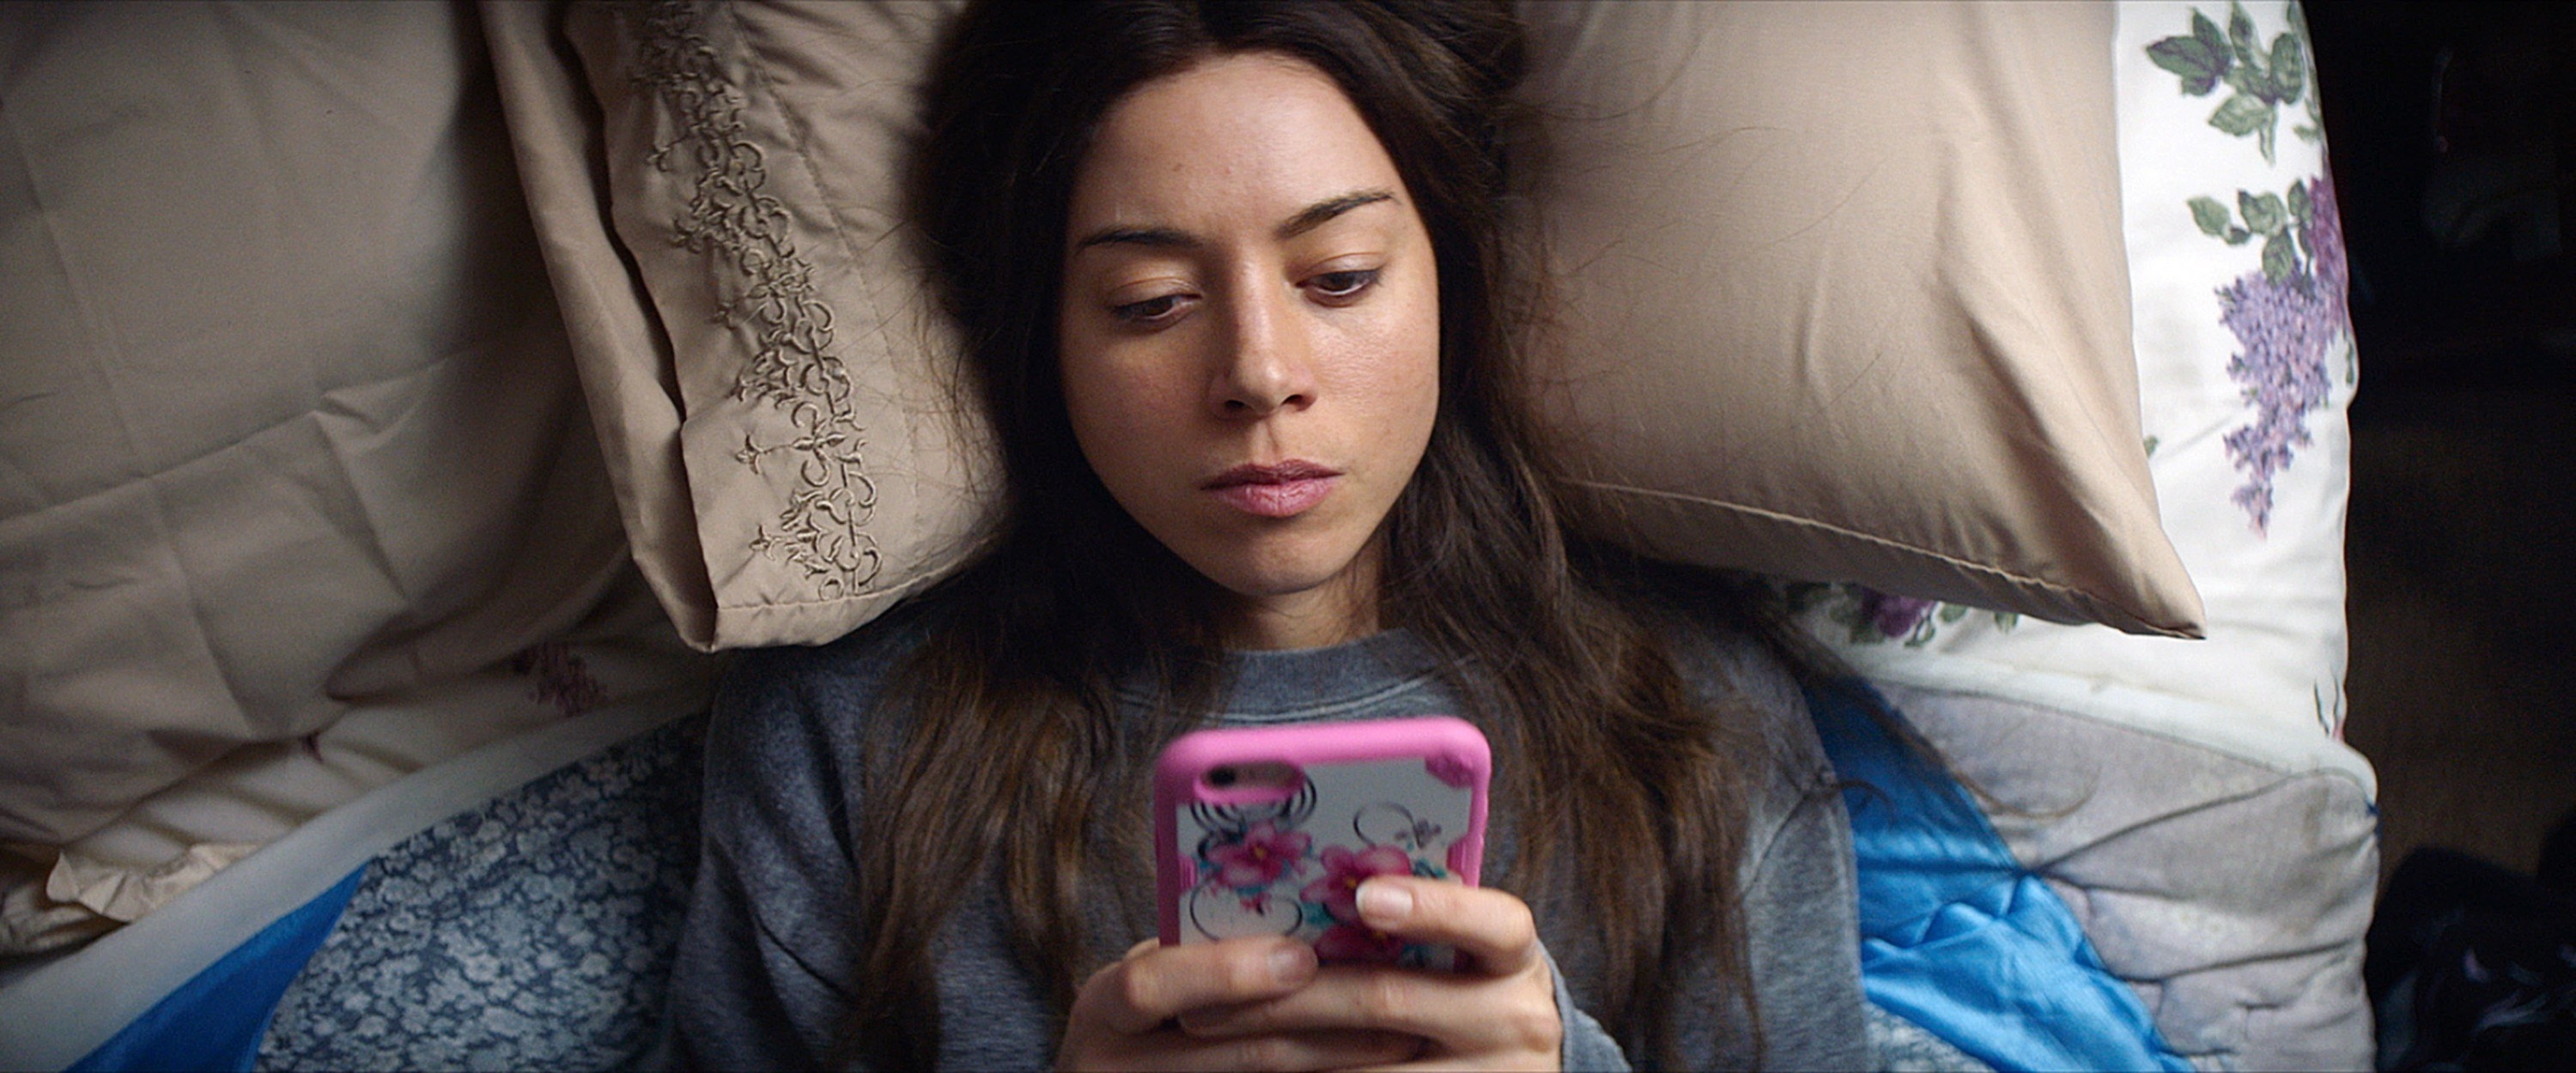 A woman lying in bed looking at her phone and looking glum